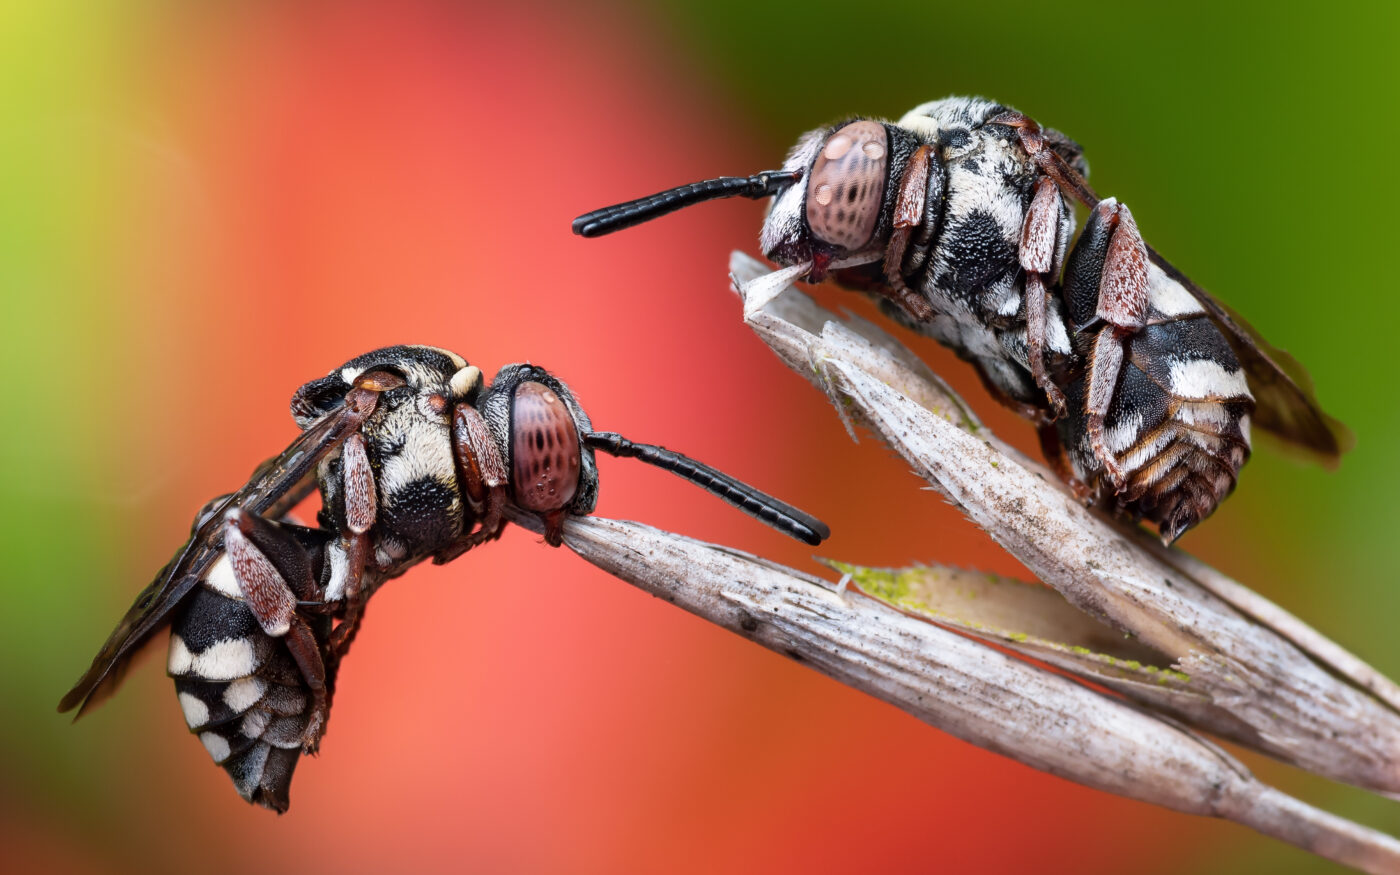 Two Cuckoo Bees (Epeolus variegatus) fast asleep, grasping onto the grass with their mandibles. Still with a few drops of morning dew on them. Handheld focus stack.